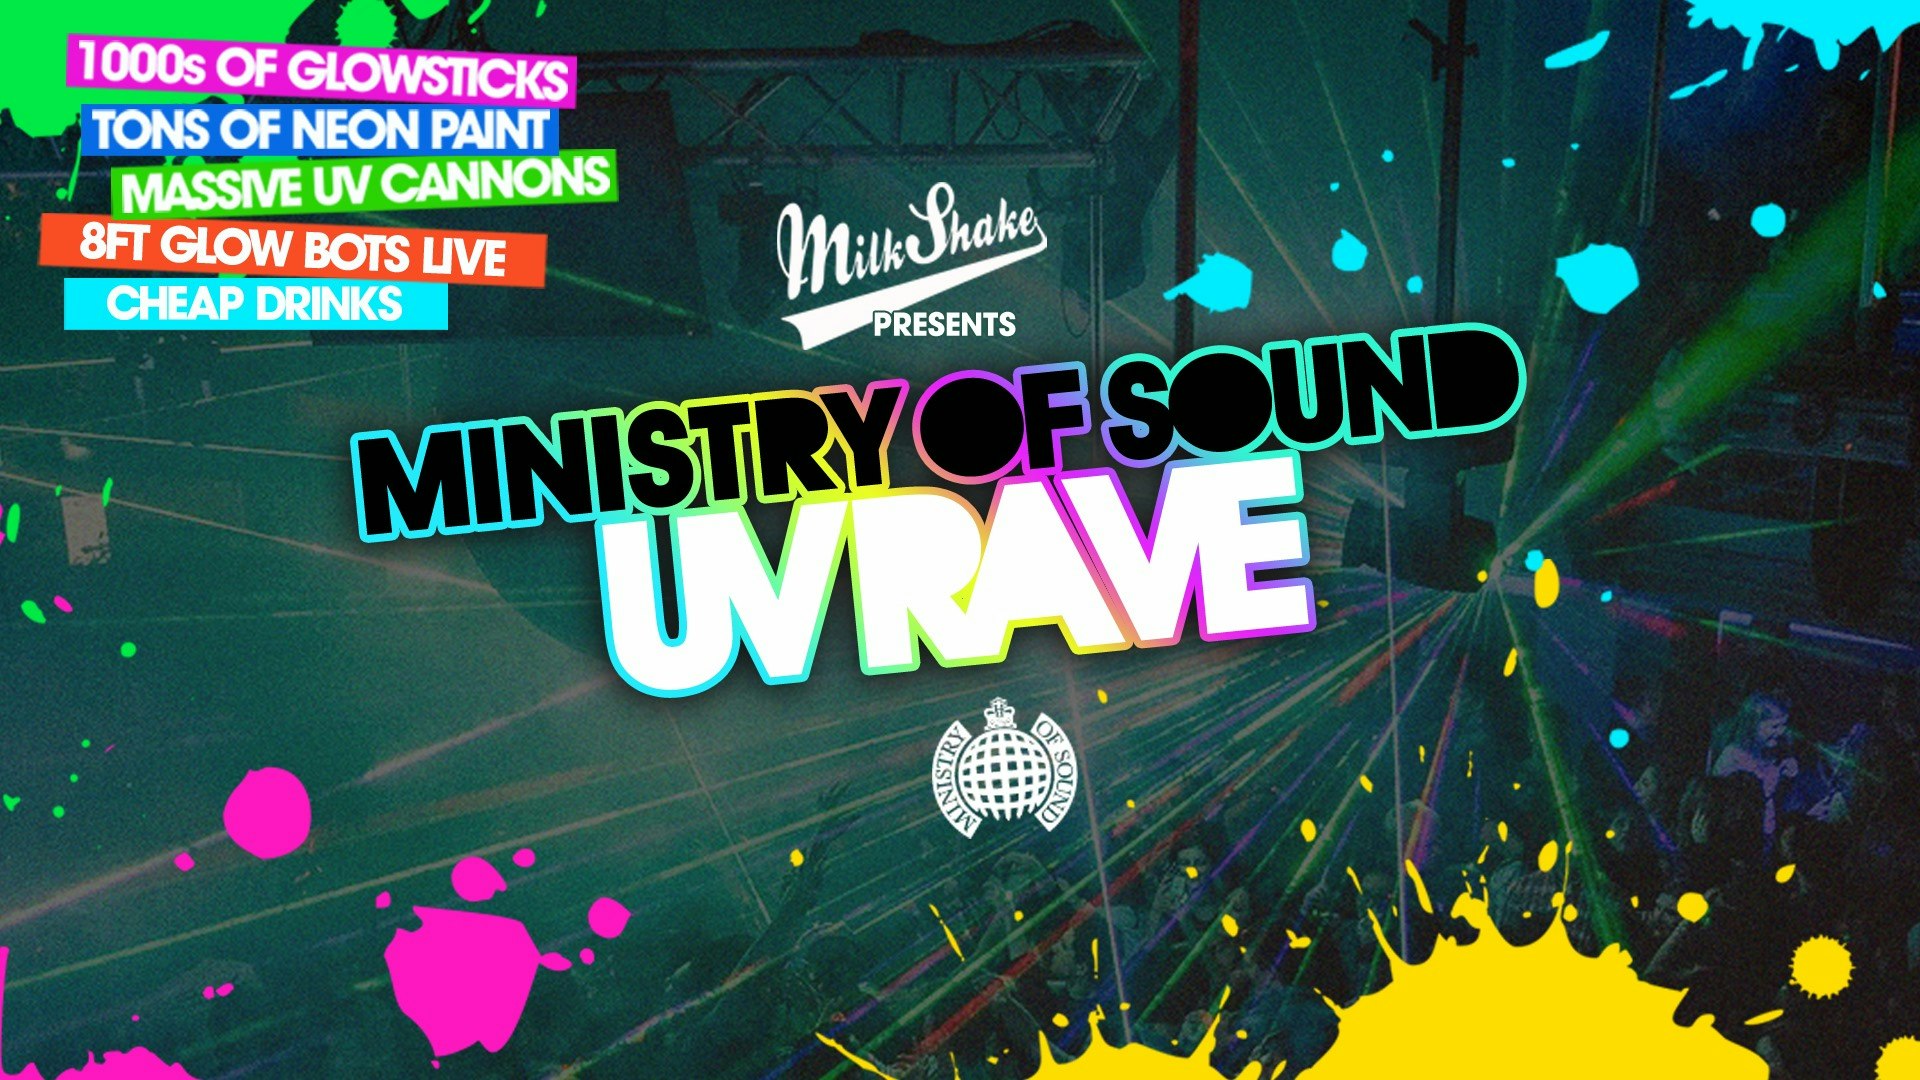 ⚠️ SOLD OUT ⚠️  The Milkshake, Ministry of Sound UV Rave ⚡ 2022 – ⚠️  SOLD OUT ⚠️